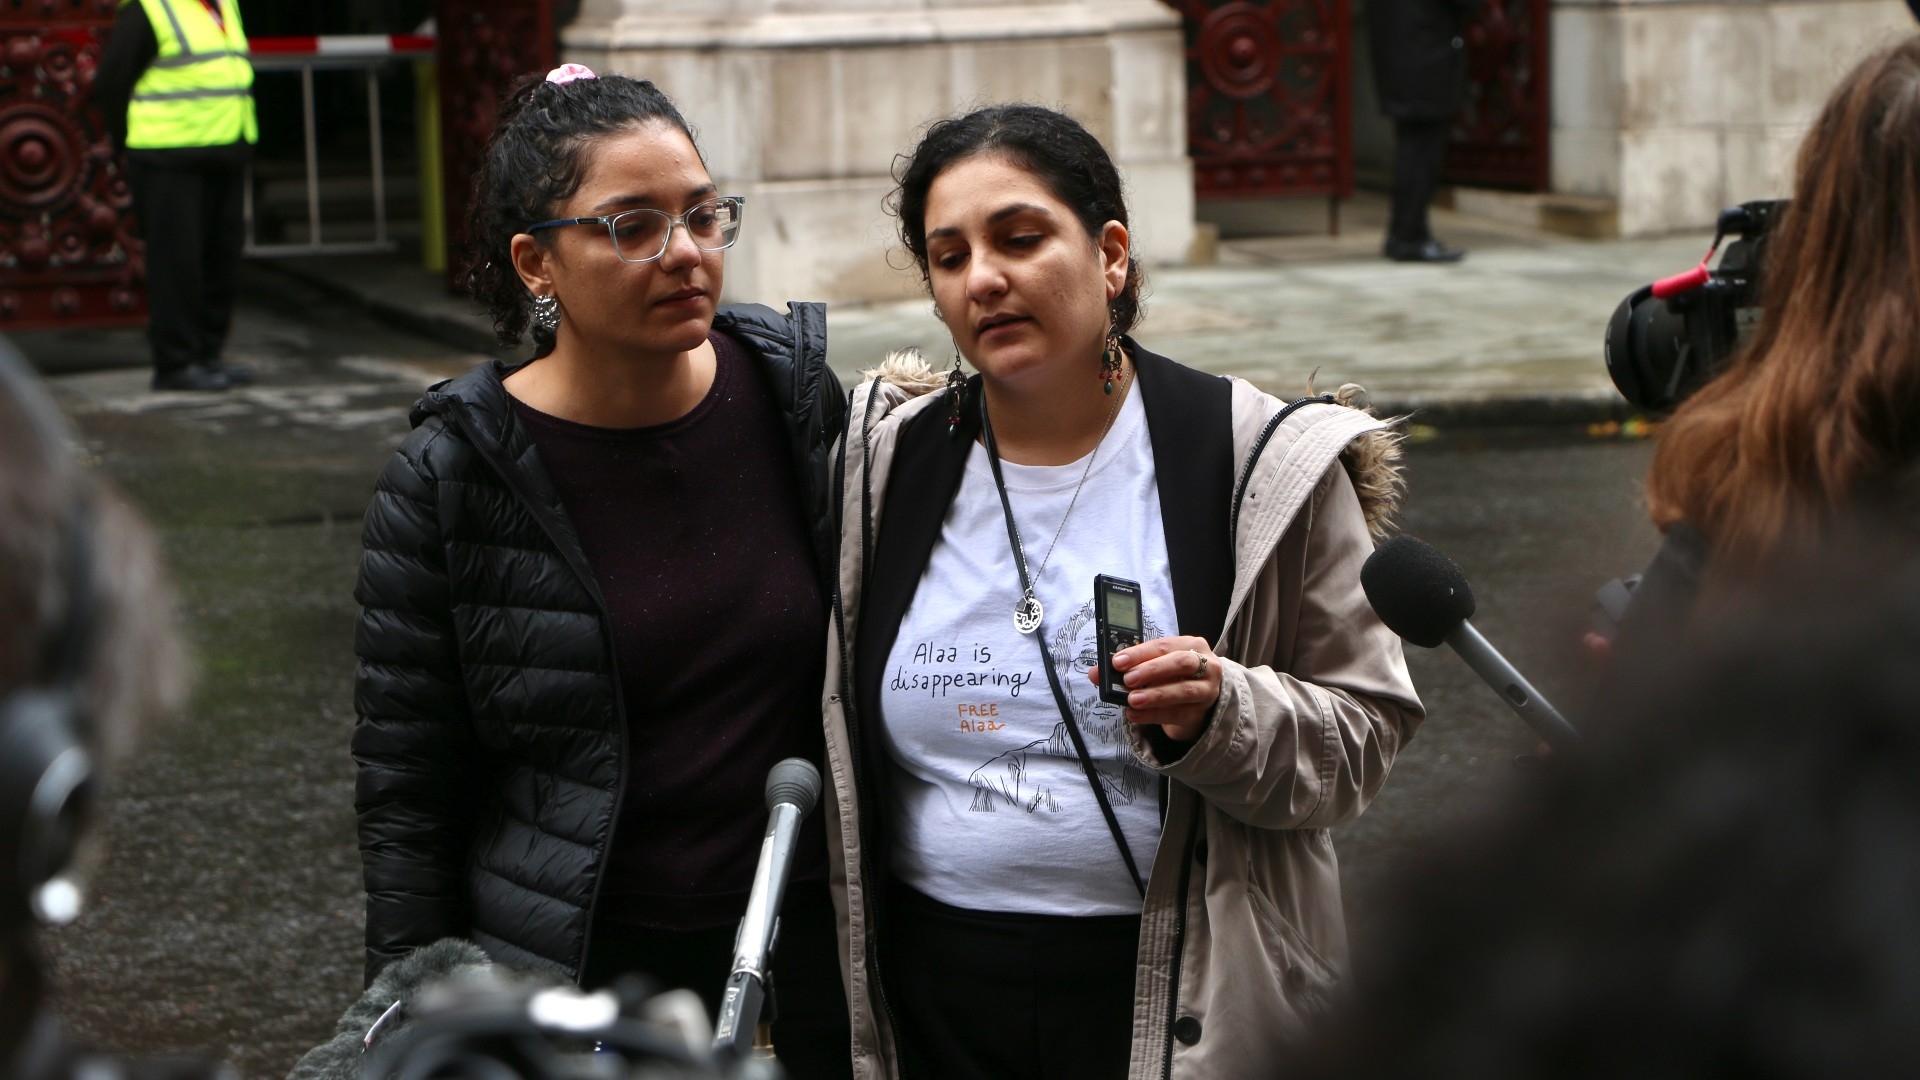 Sanaa (left) and Mona Seif (right), sisters of jailed British-Egyptian writer Alaa Abd-el Fattah, speak during a press conference in London on 3 November 2022 (MEE/Hossam Sarhan)